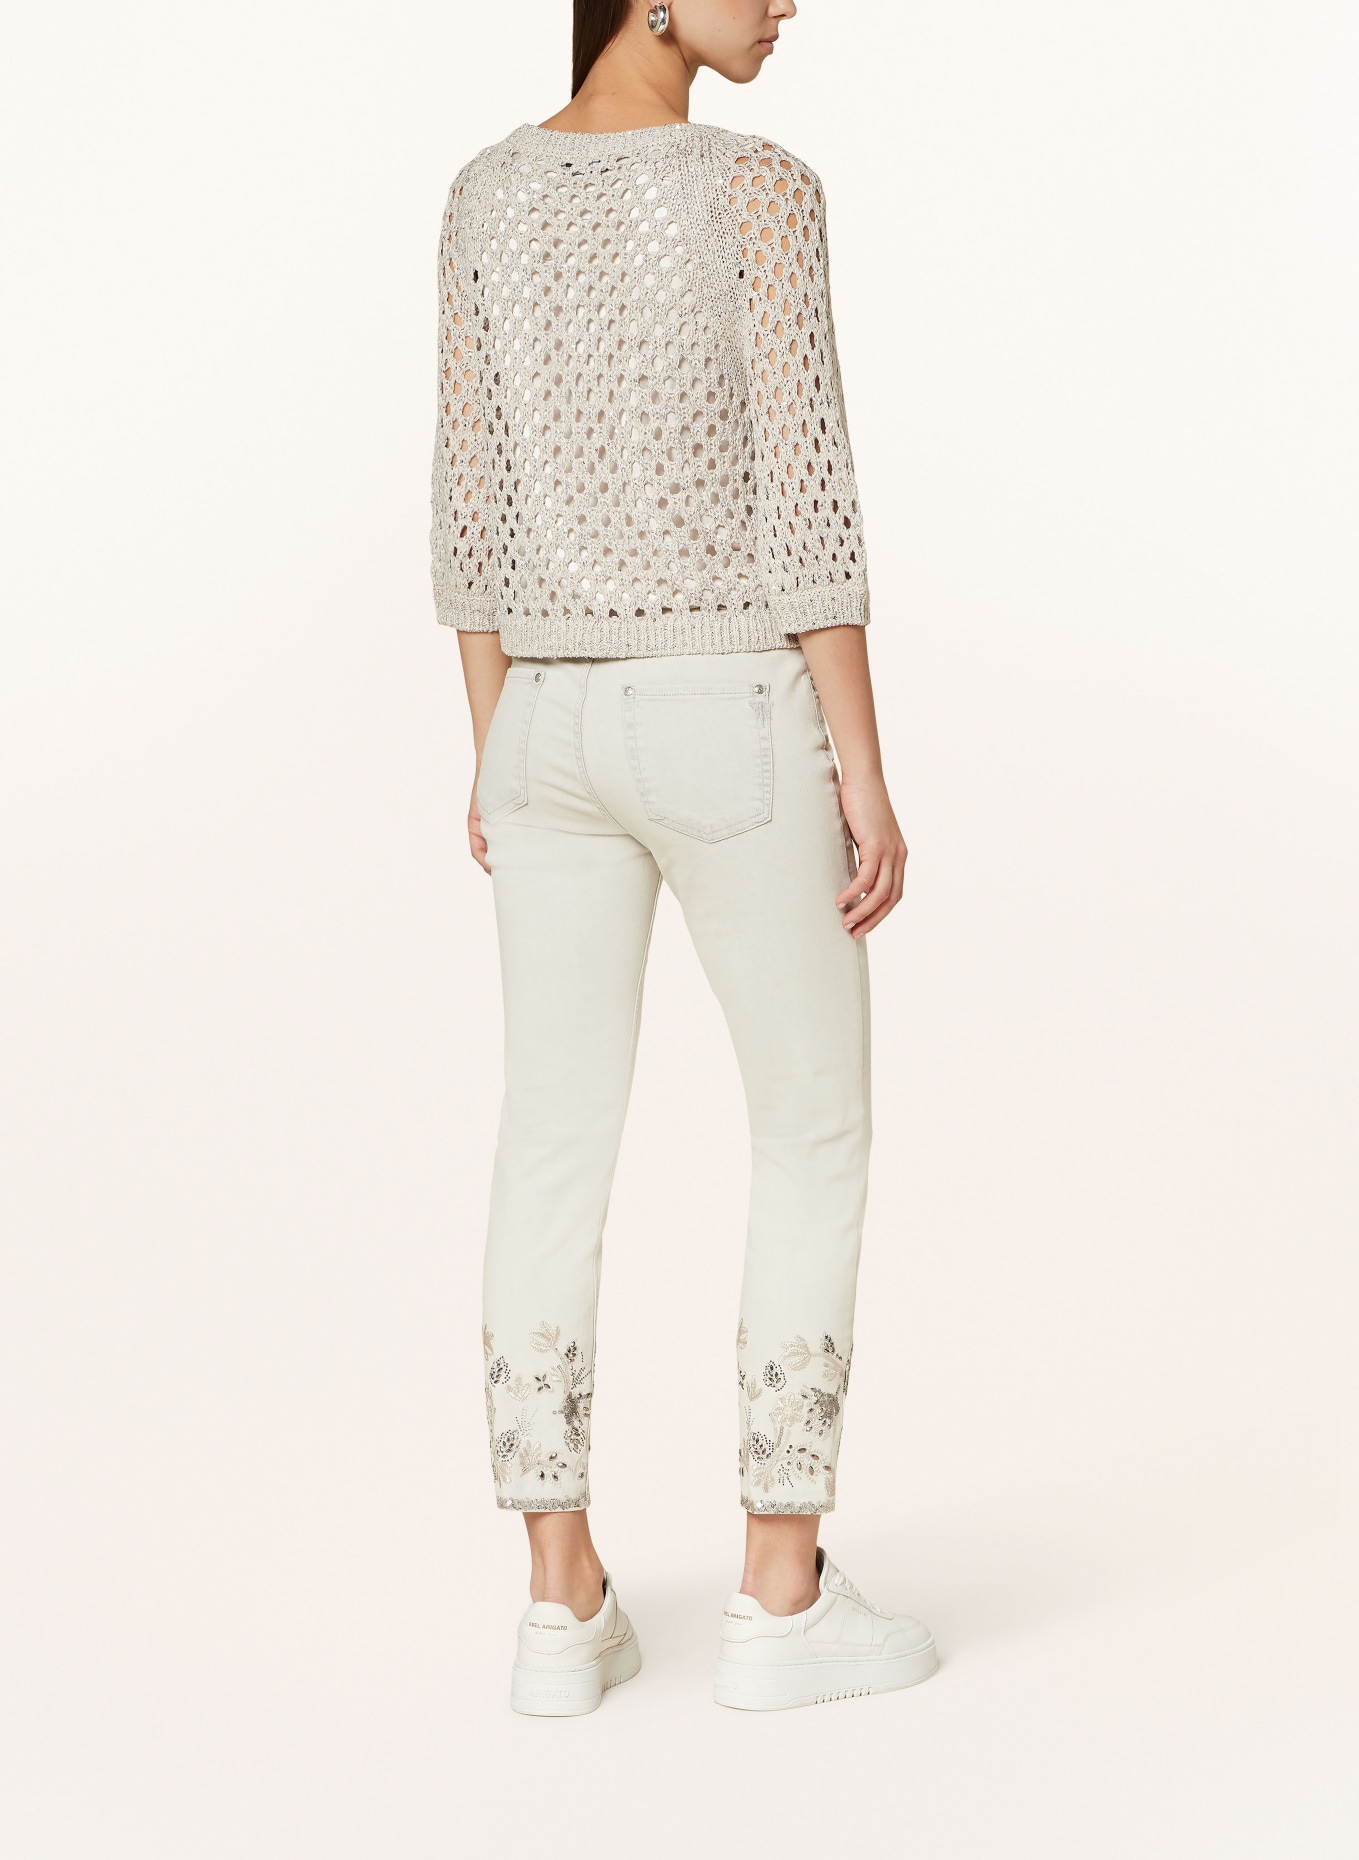 monari Knit shirt with 3/4 sleeves and sequins, Color: 540 light sand (Image 3)